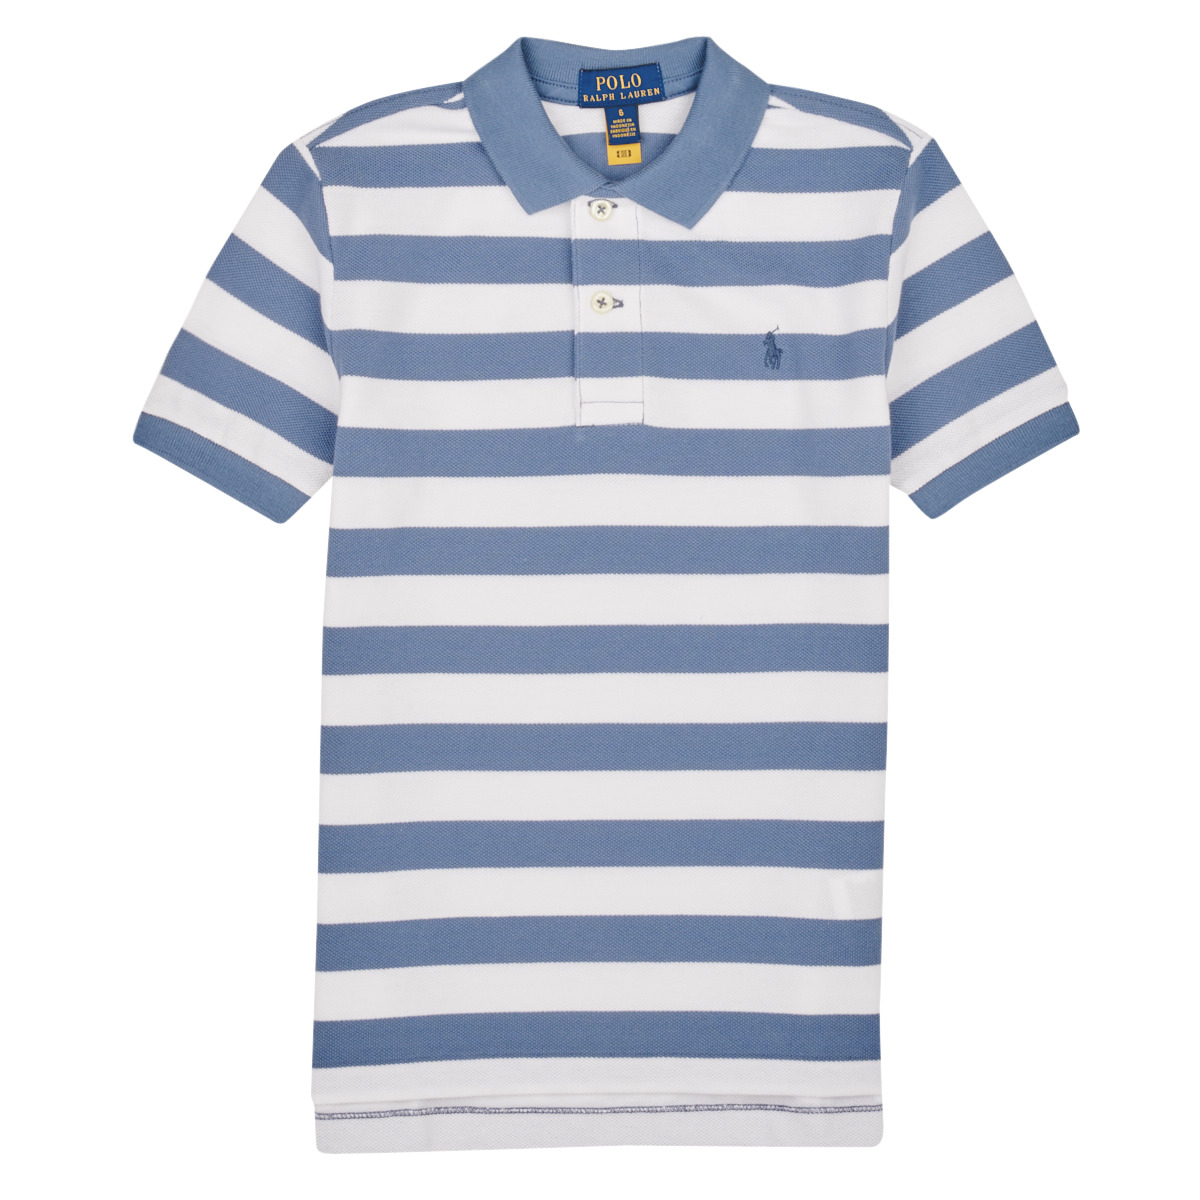 Polo Ralph Lauren SSKC M1-KNIT SHIRTS-POLO SHIRT White / Blue - Fast  delivery